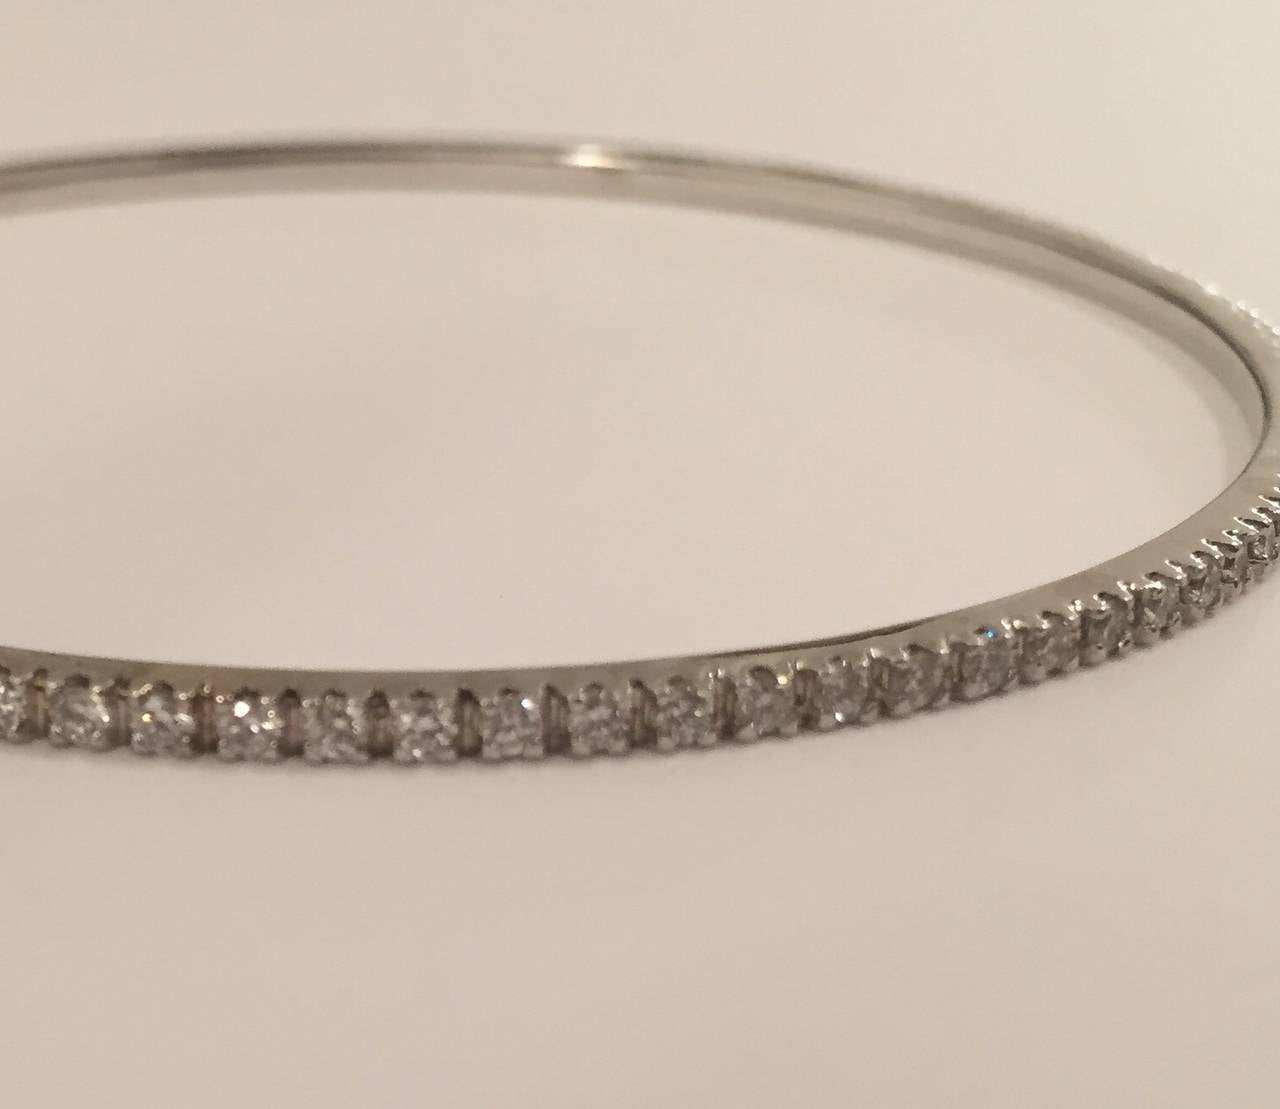 Delicate 18kt White Gold Diamond Bangle Bracelet with diamonds weighing 1.85 cts.  These look great when worn with multiples and stacked!